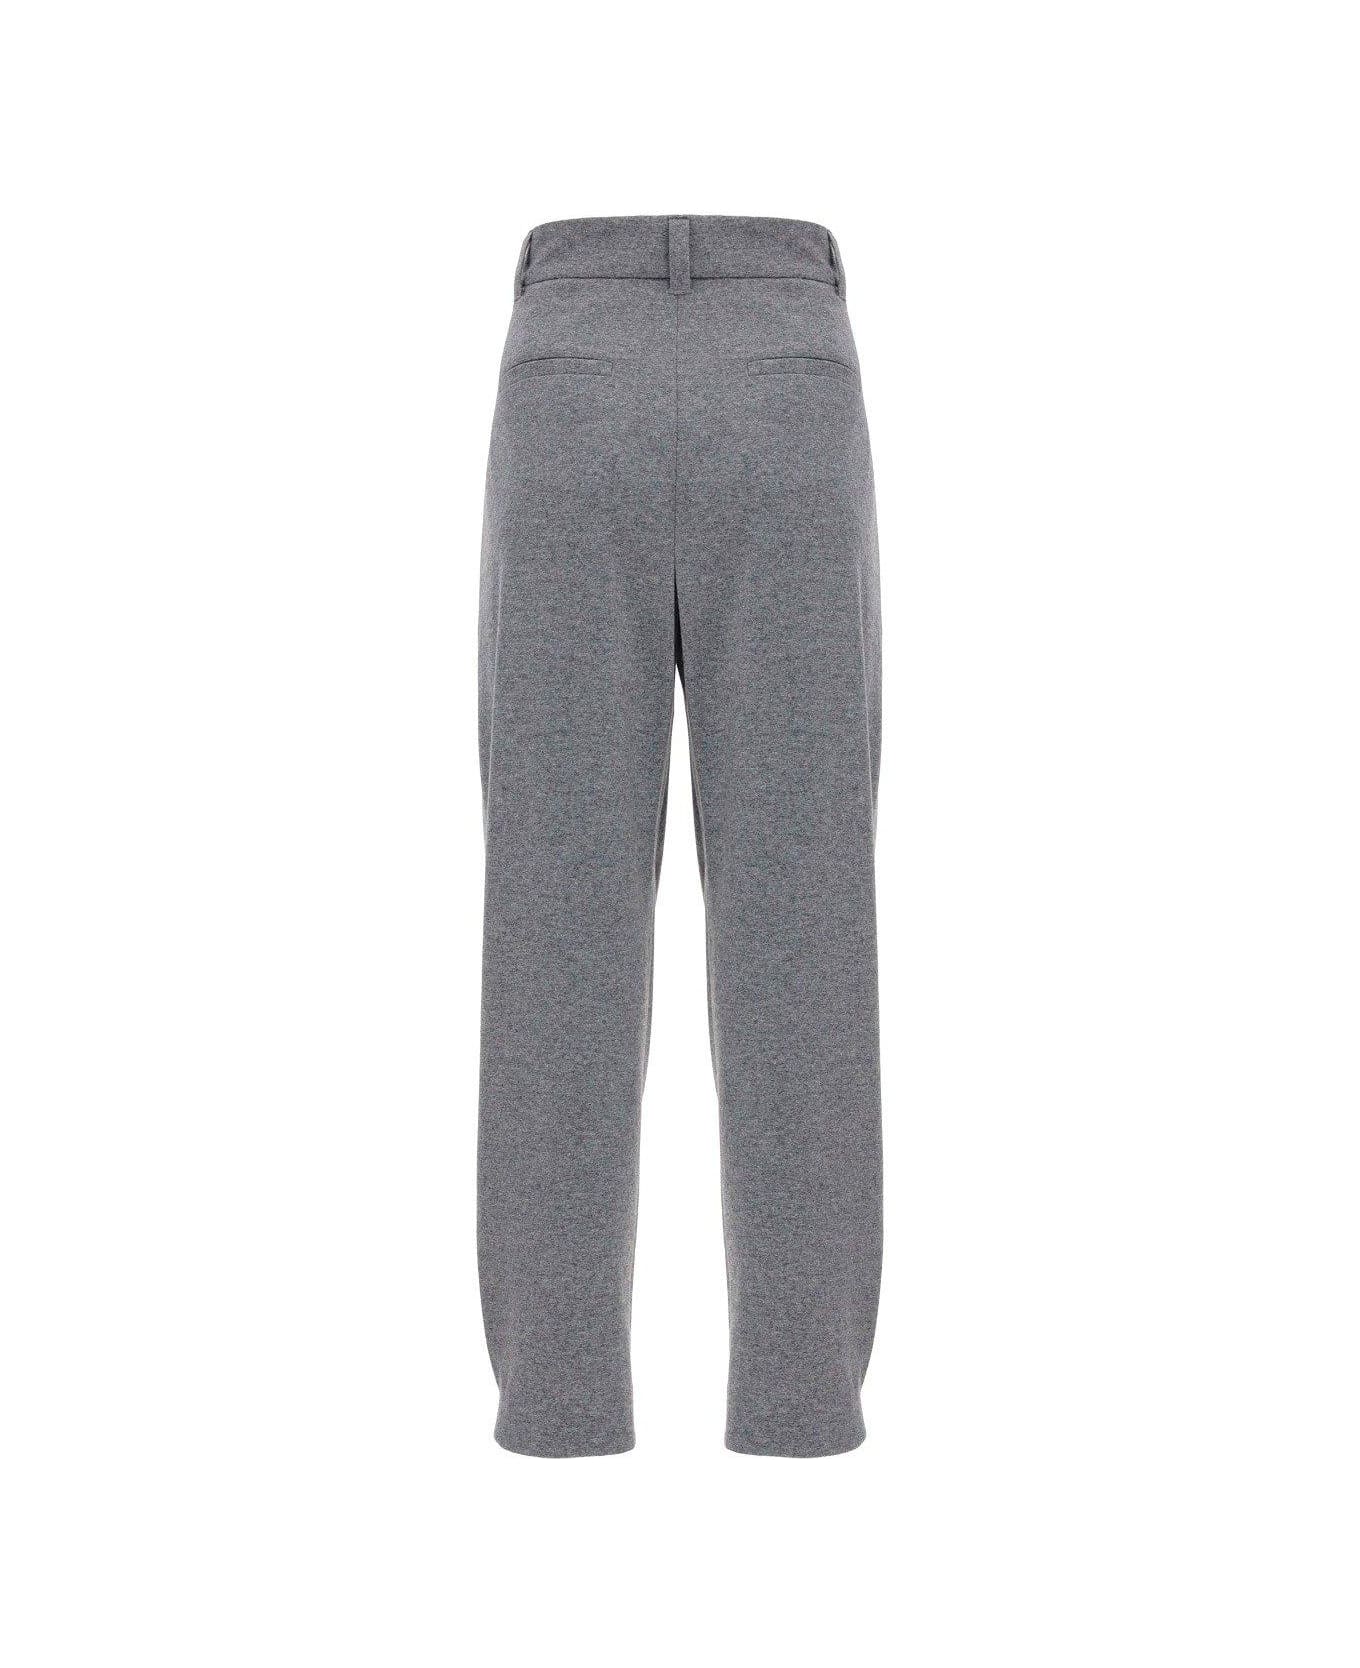 Brunello Cucinelli Tapered Pants - Grey